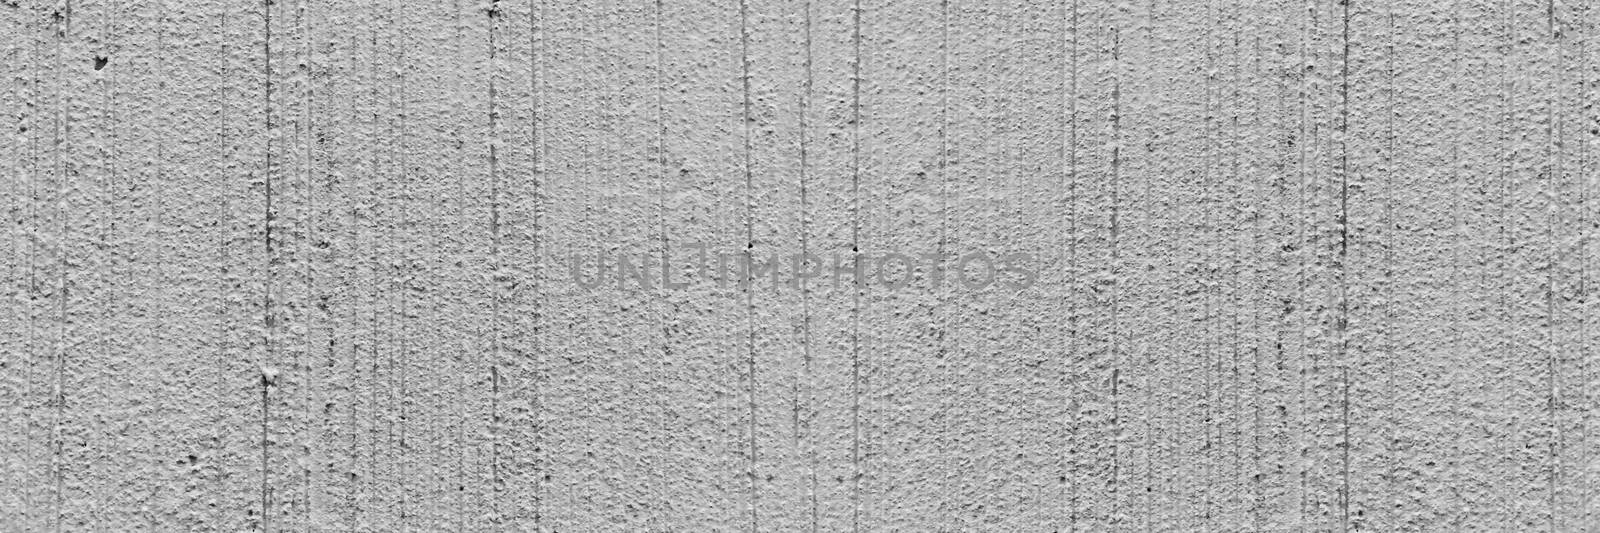 Panorama gray rough textured concrete background. copy space, text box, background for lettering, background for calligraphy